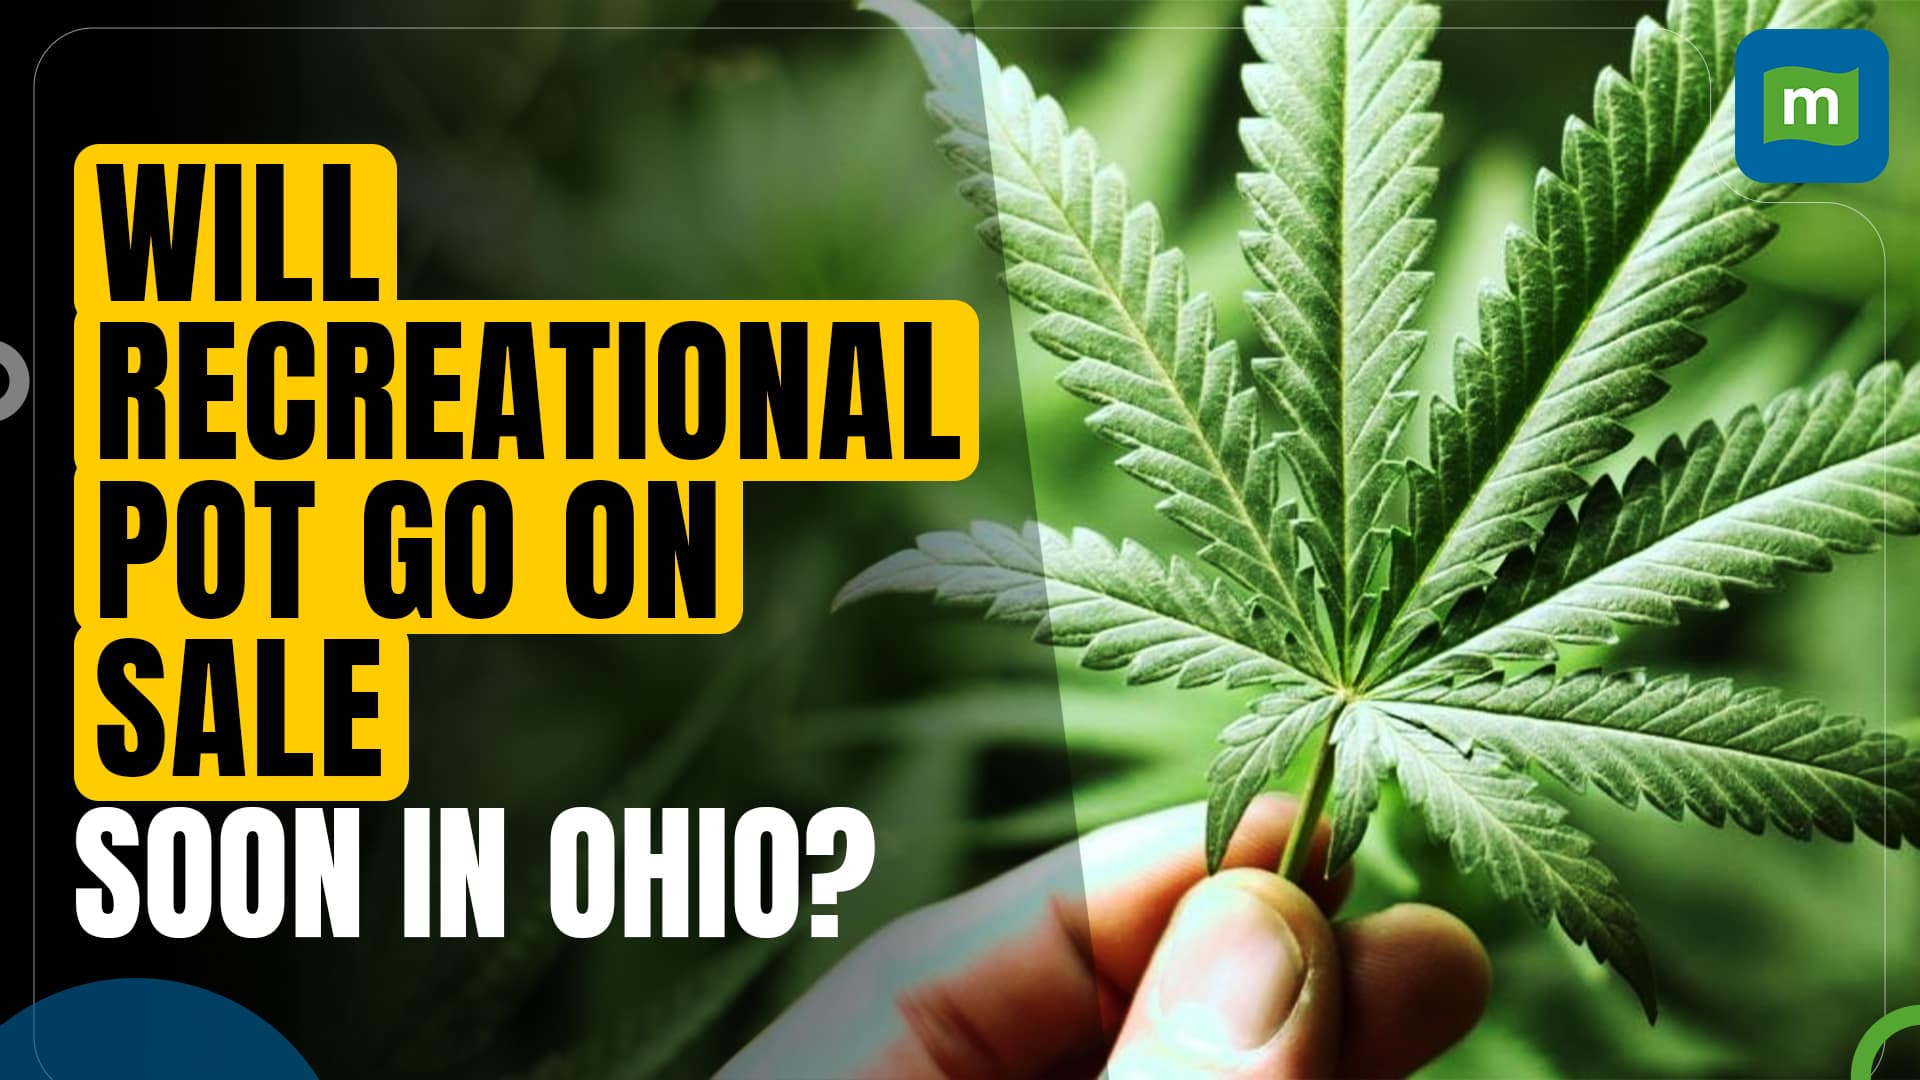 Non-medical cannabis can now be sold by existing medical marijuana dispensaries in Ohio